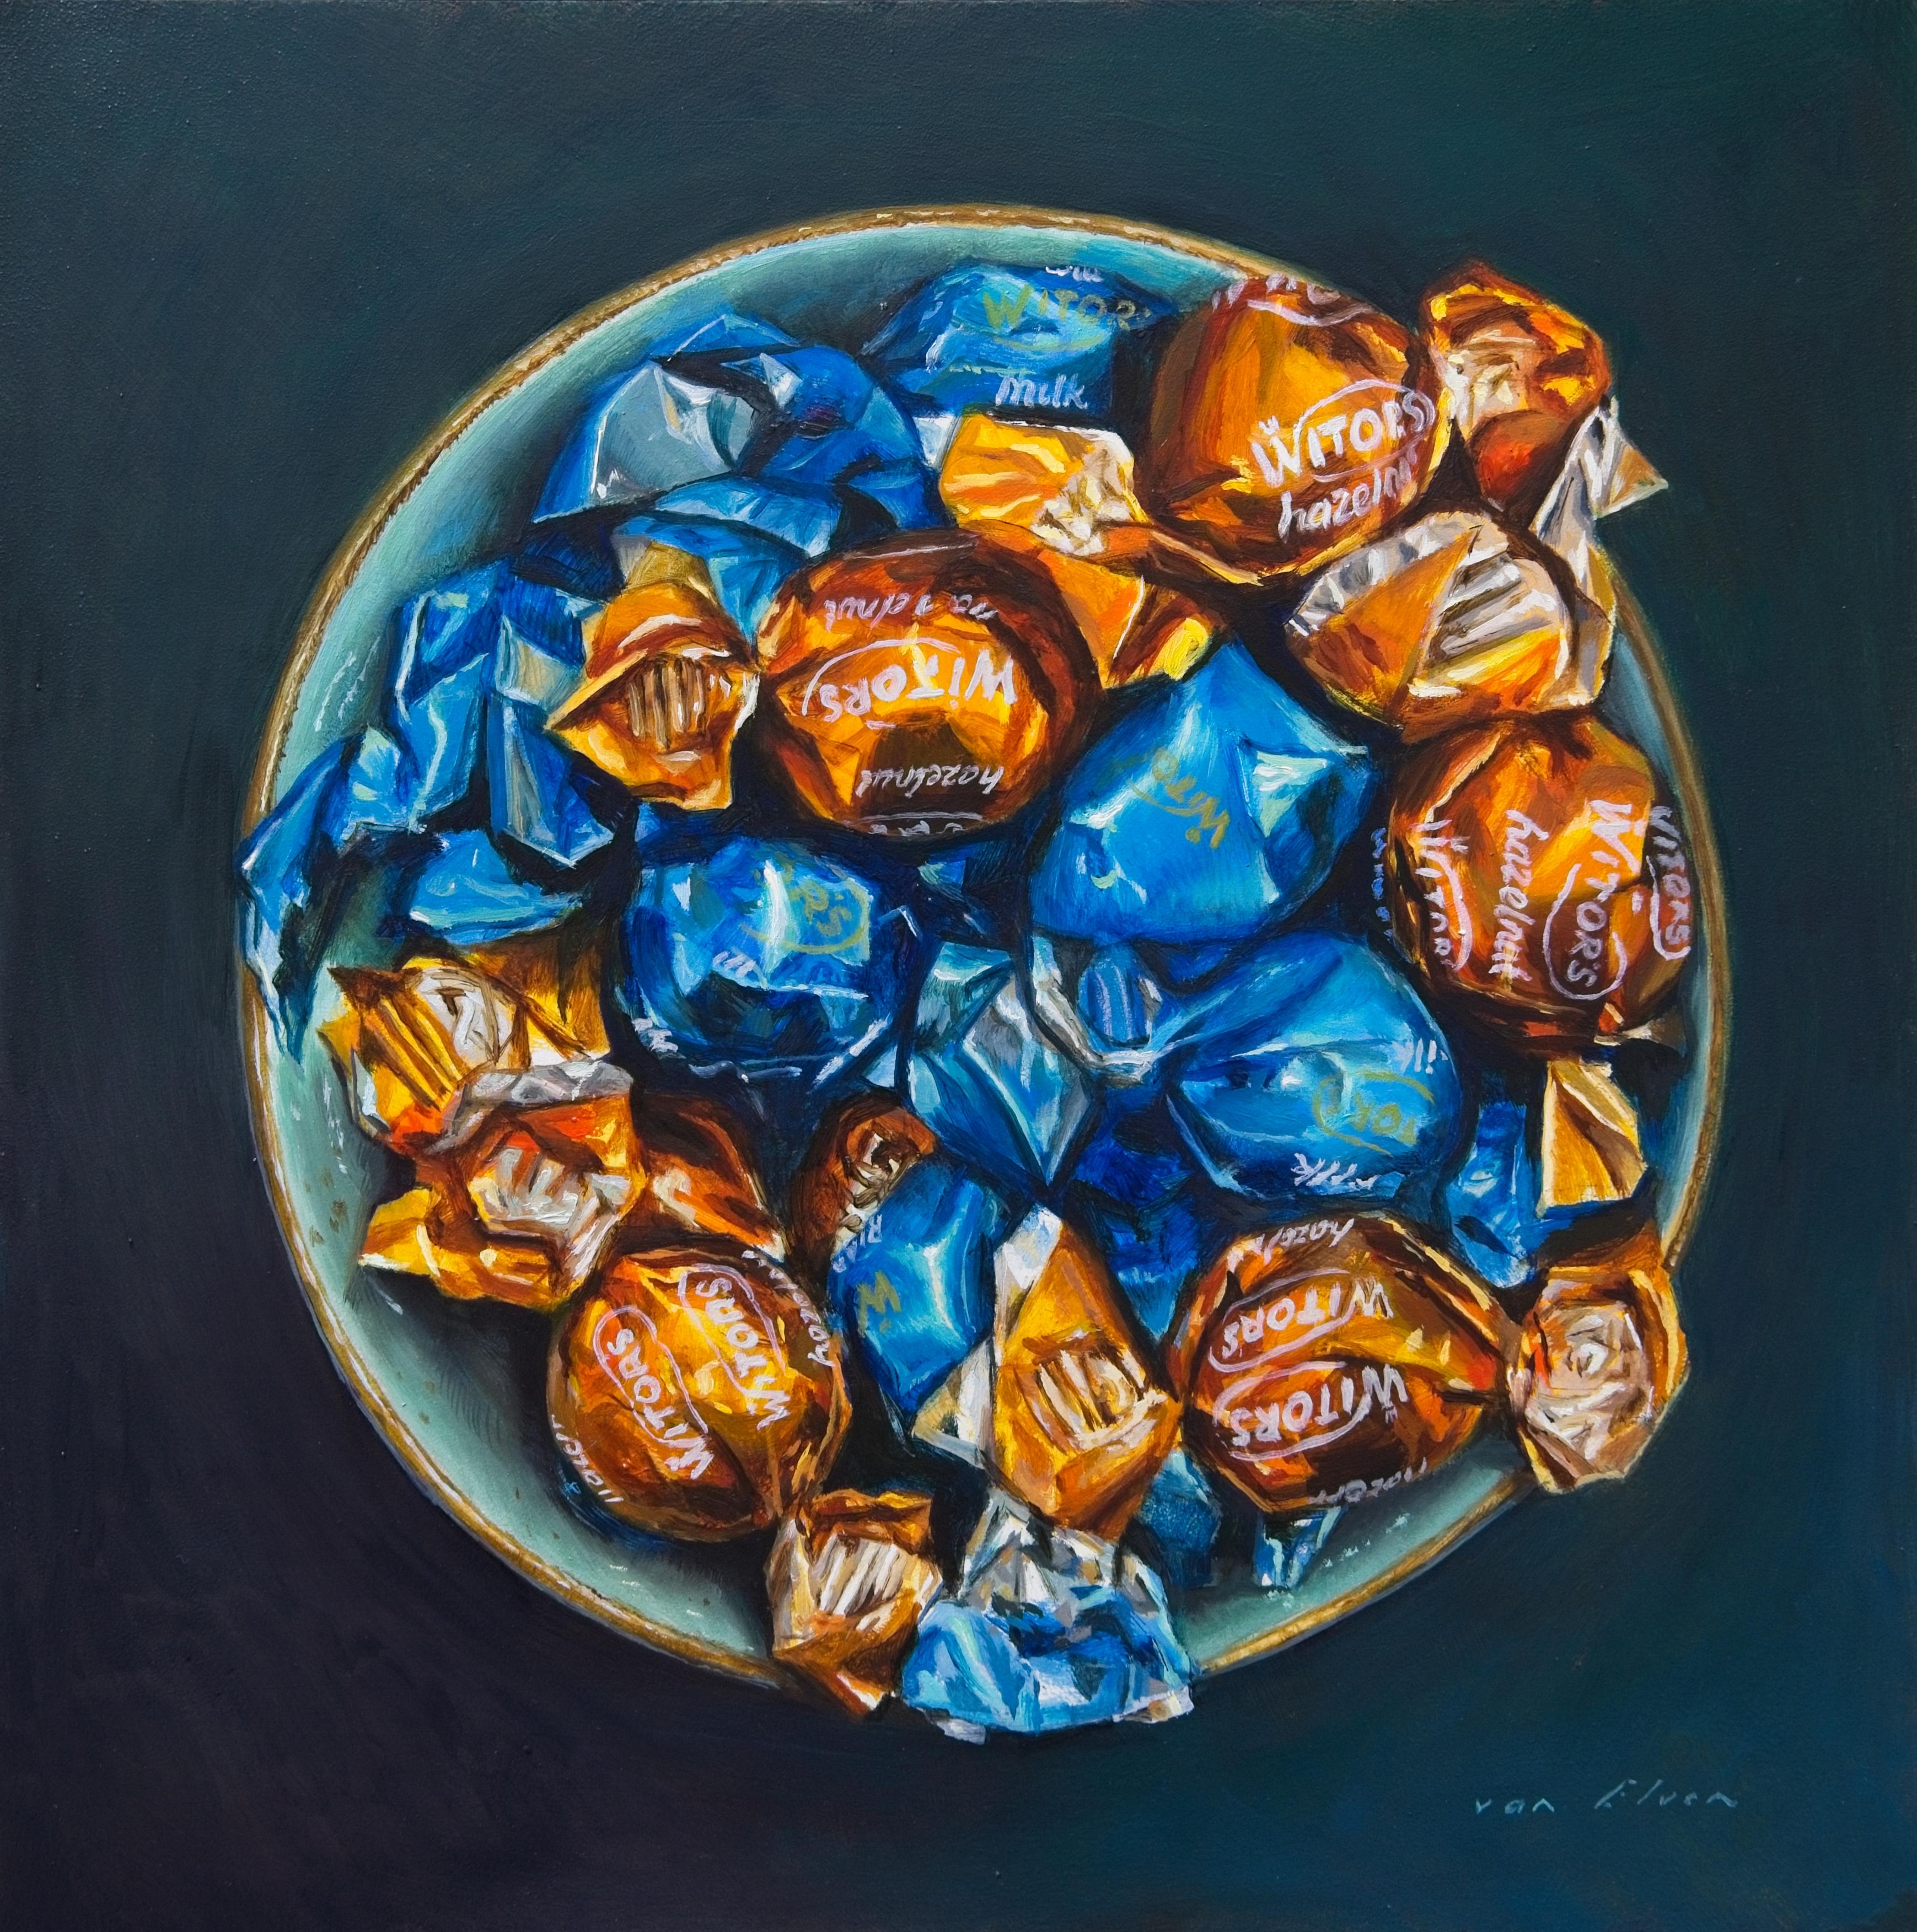 Erik van Elven Figurative Painting - Temptation Island- 21st Century Stilllife painting of a bowl with sweets